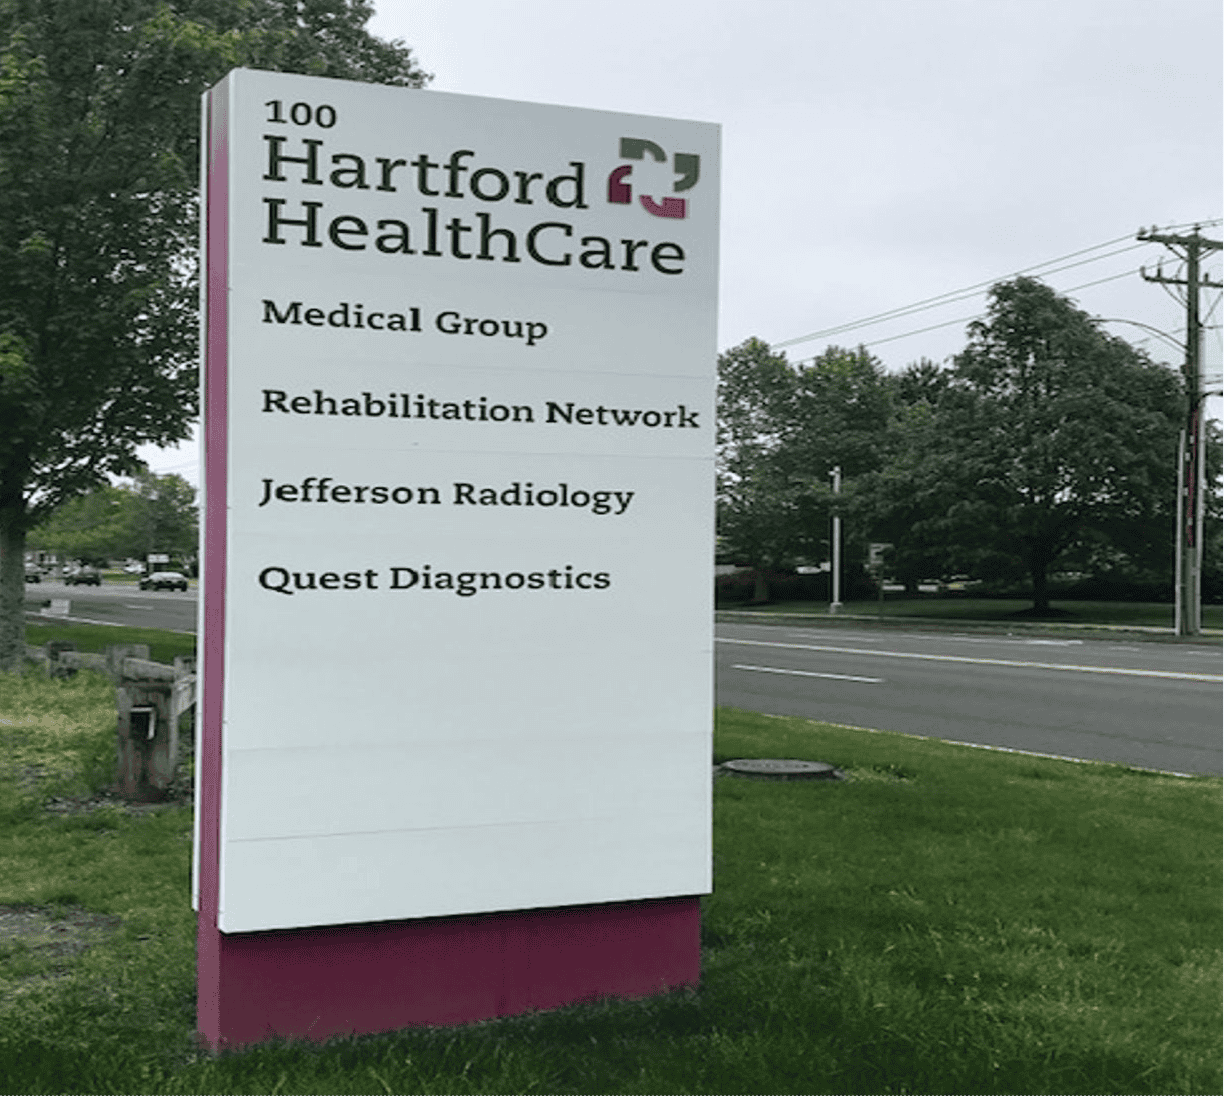 Sign with Jefferson Radiology listed